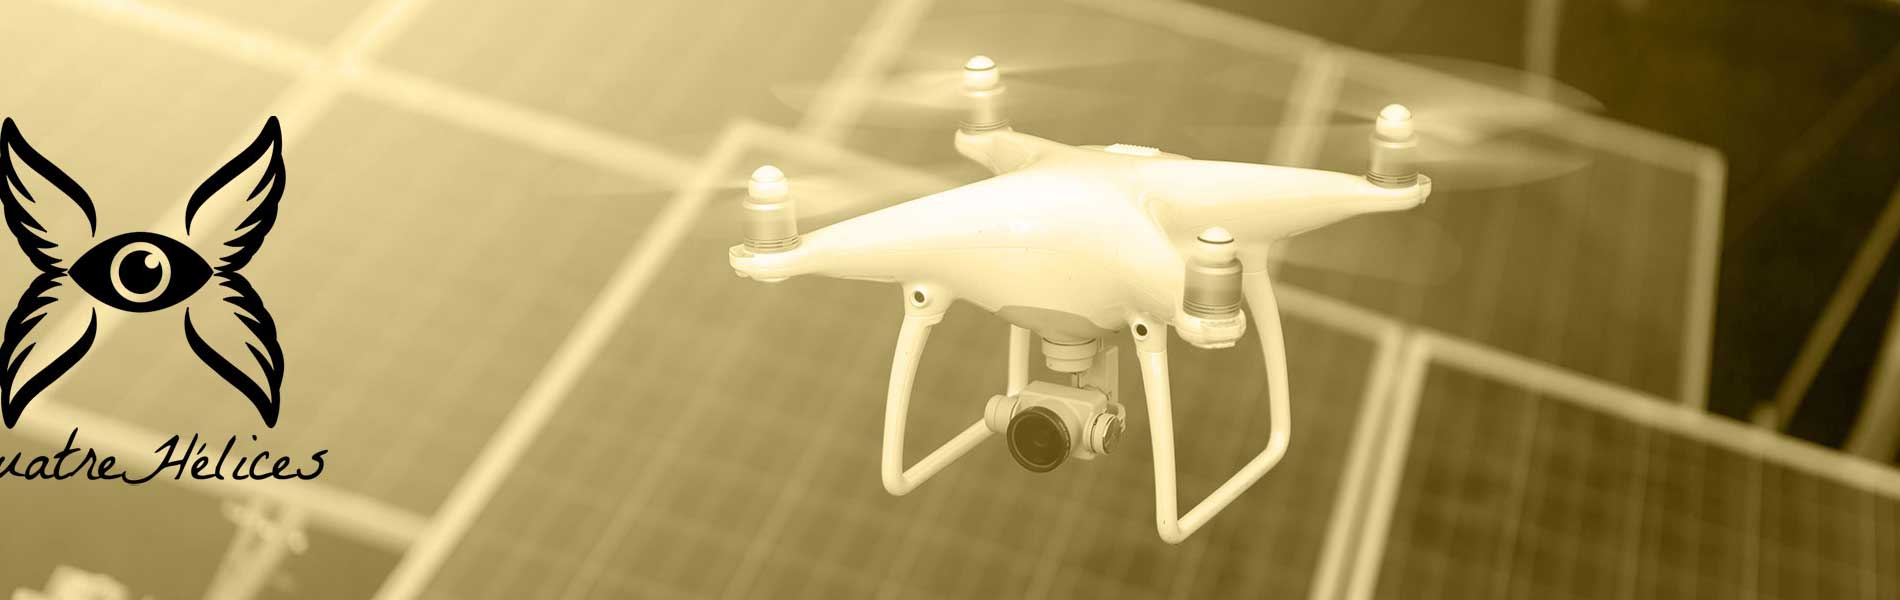 Drone immobilier tarif